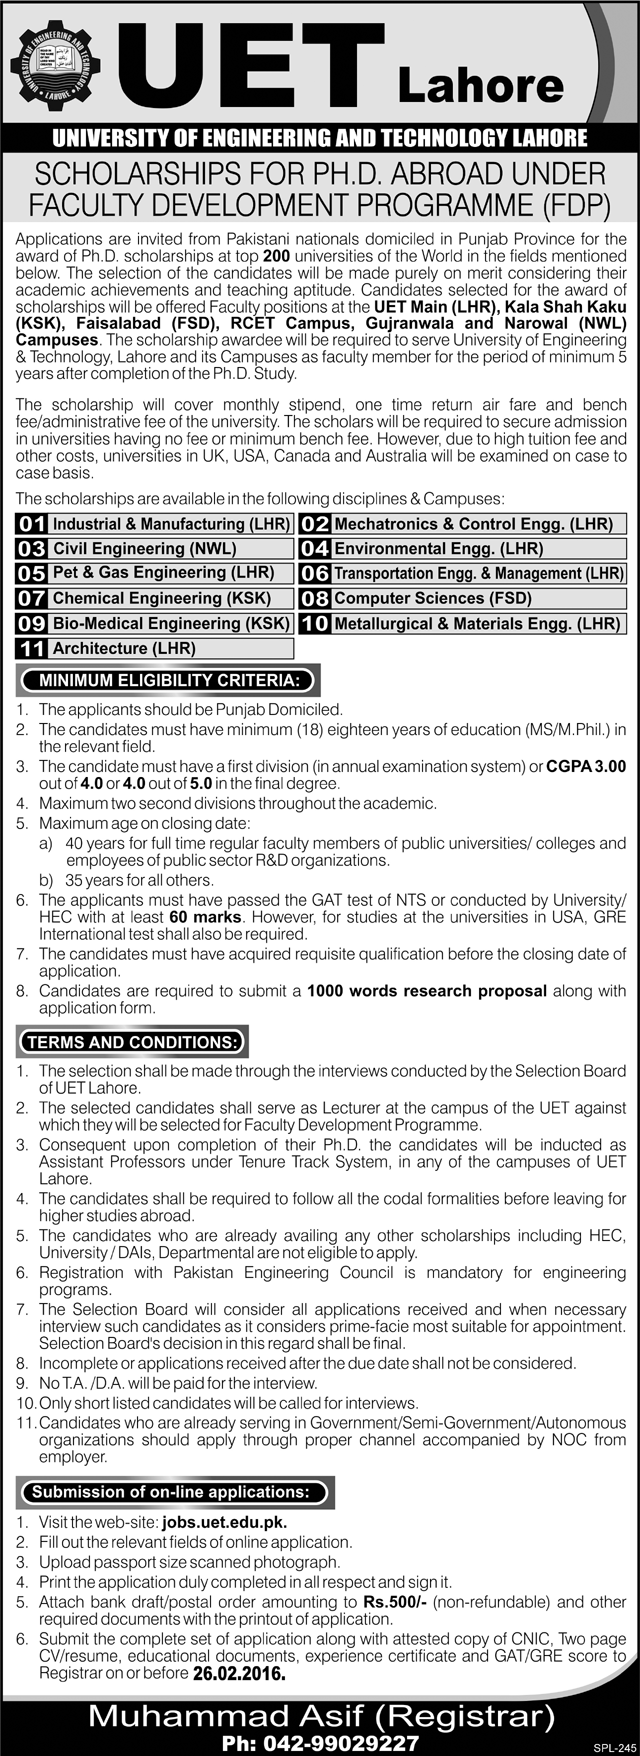 Scholarships for PhD Abroad under Faculty Development Programme (FDP) - UET Lahore